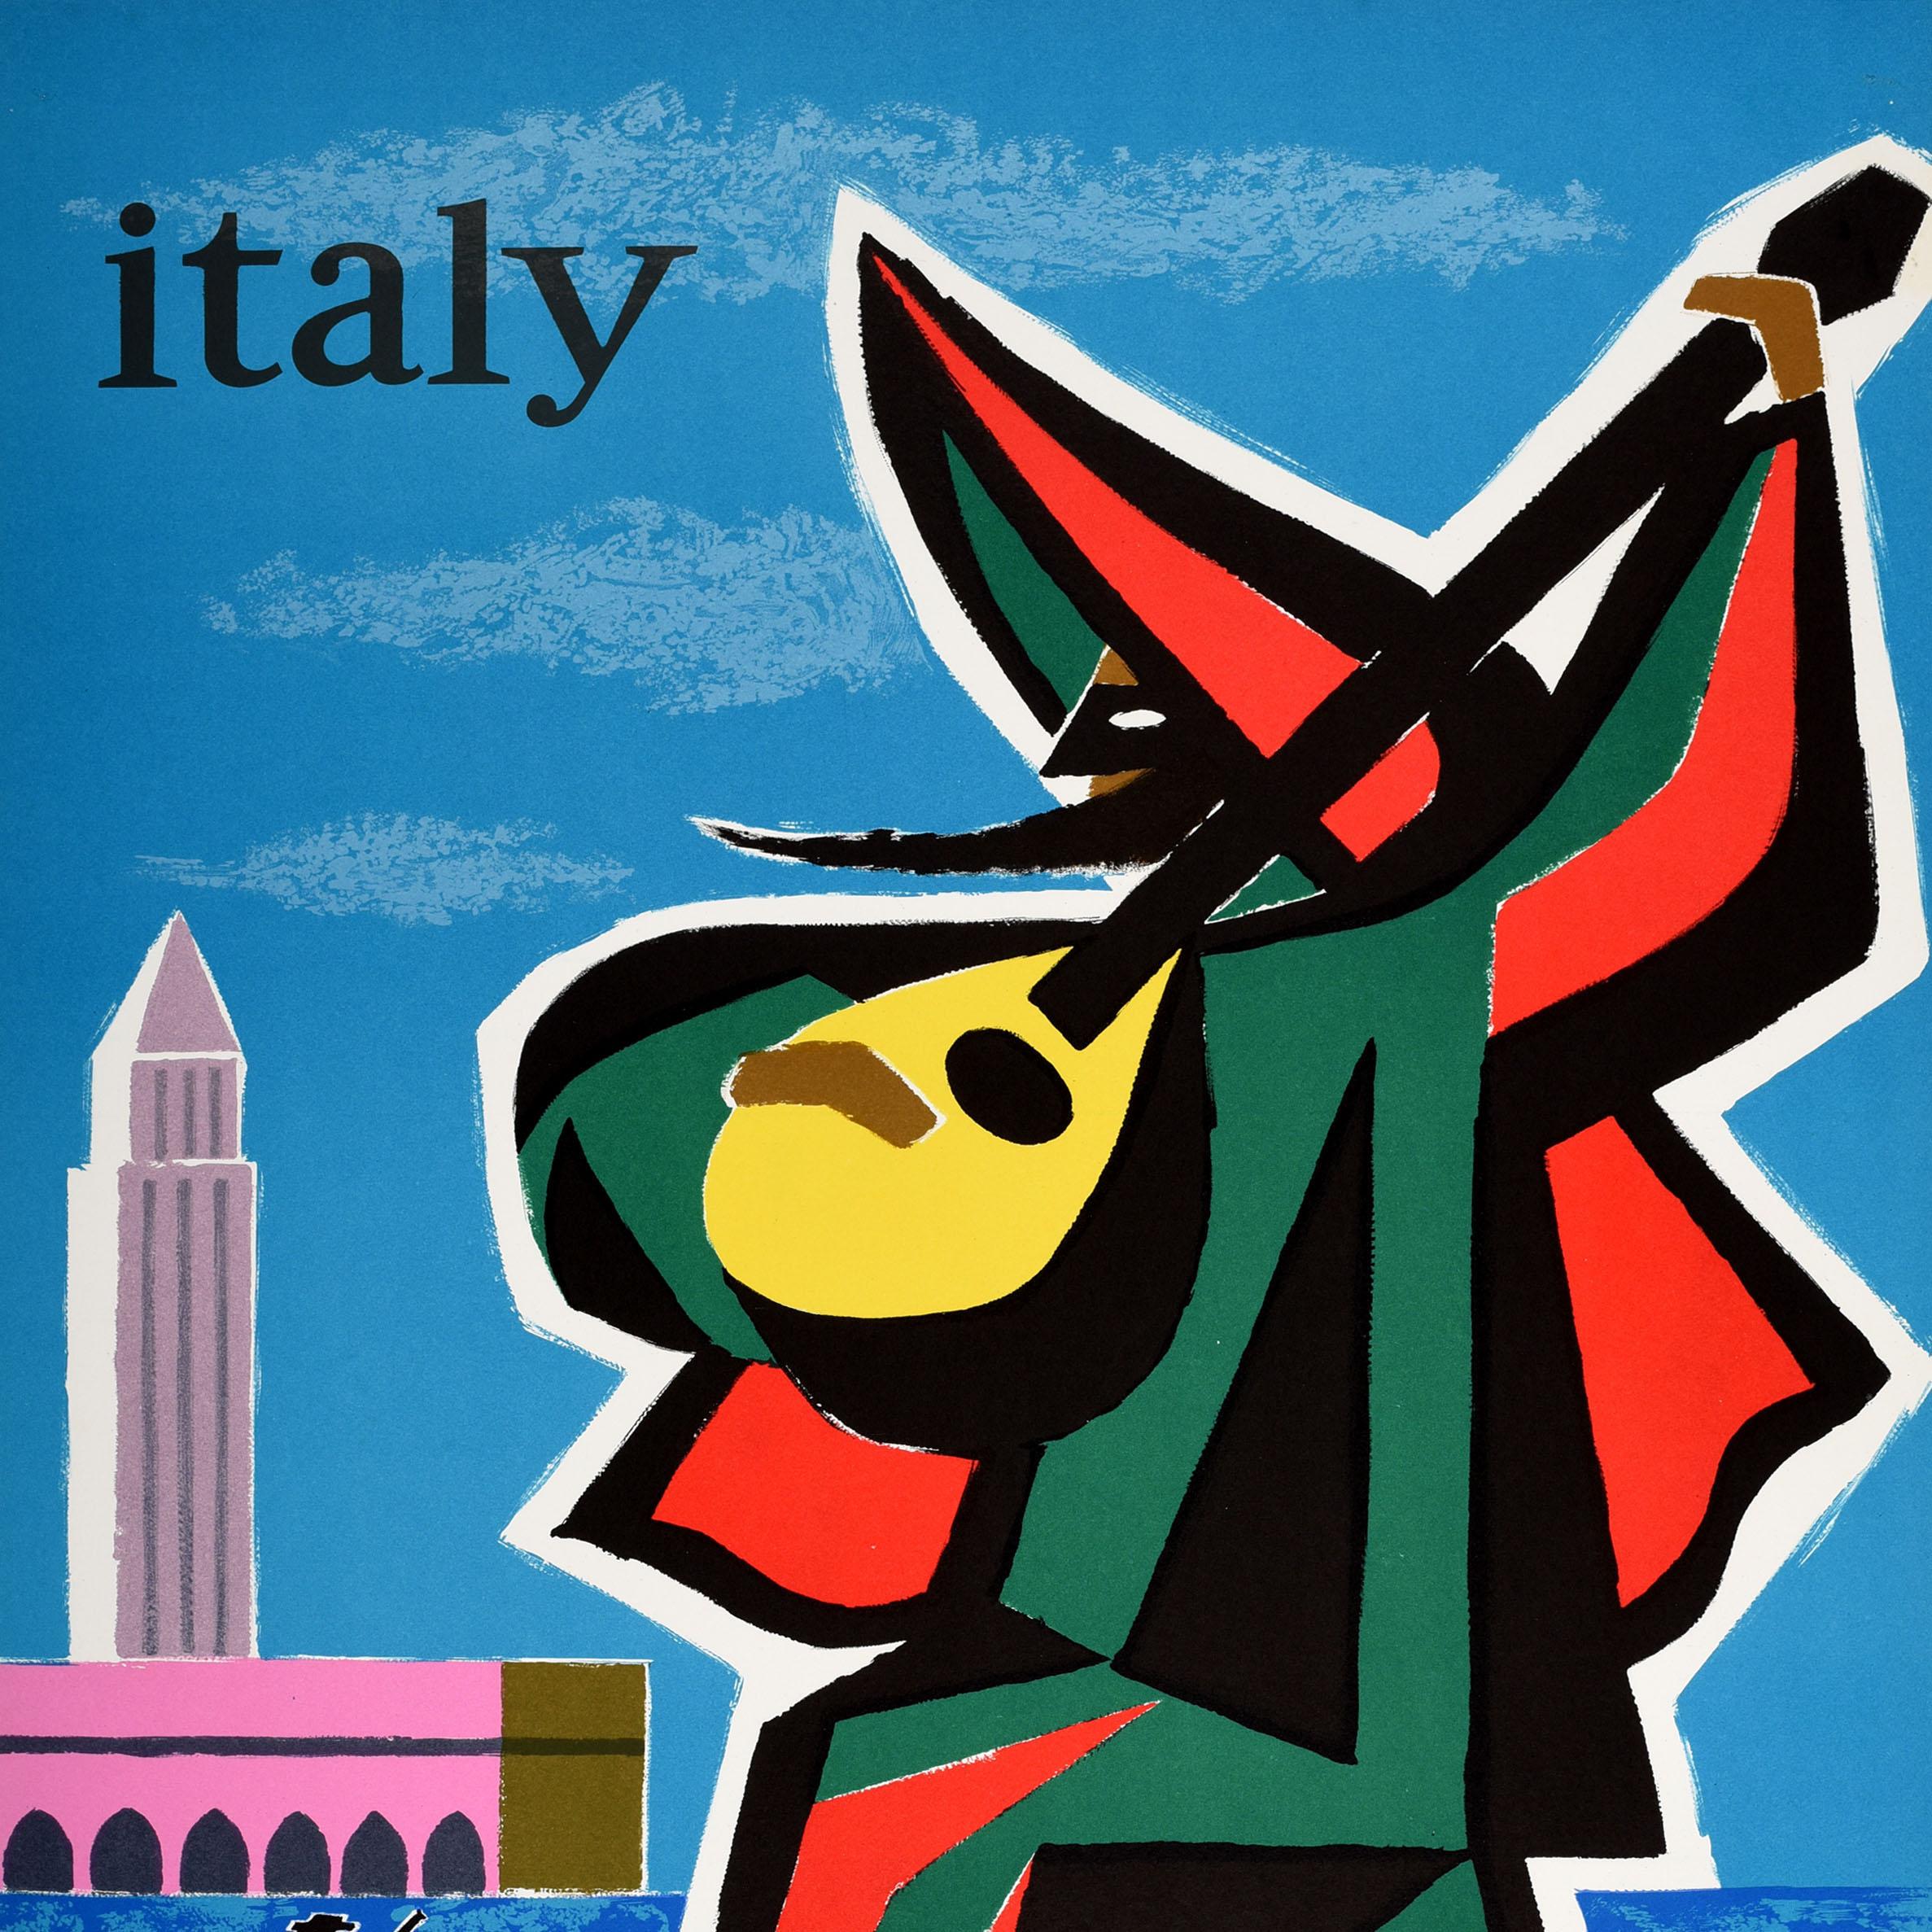 Original vintage Air France travel advertising poster for Italy featuring a fun and colourful image of Venice by Guy Georget (1911-1992) depicting a musician playing a guitar in the foreground with a gondola on the water rowing past the Piazza San